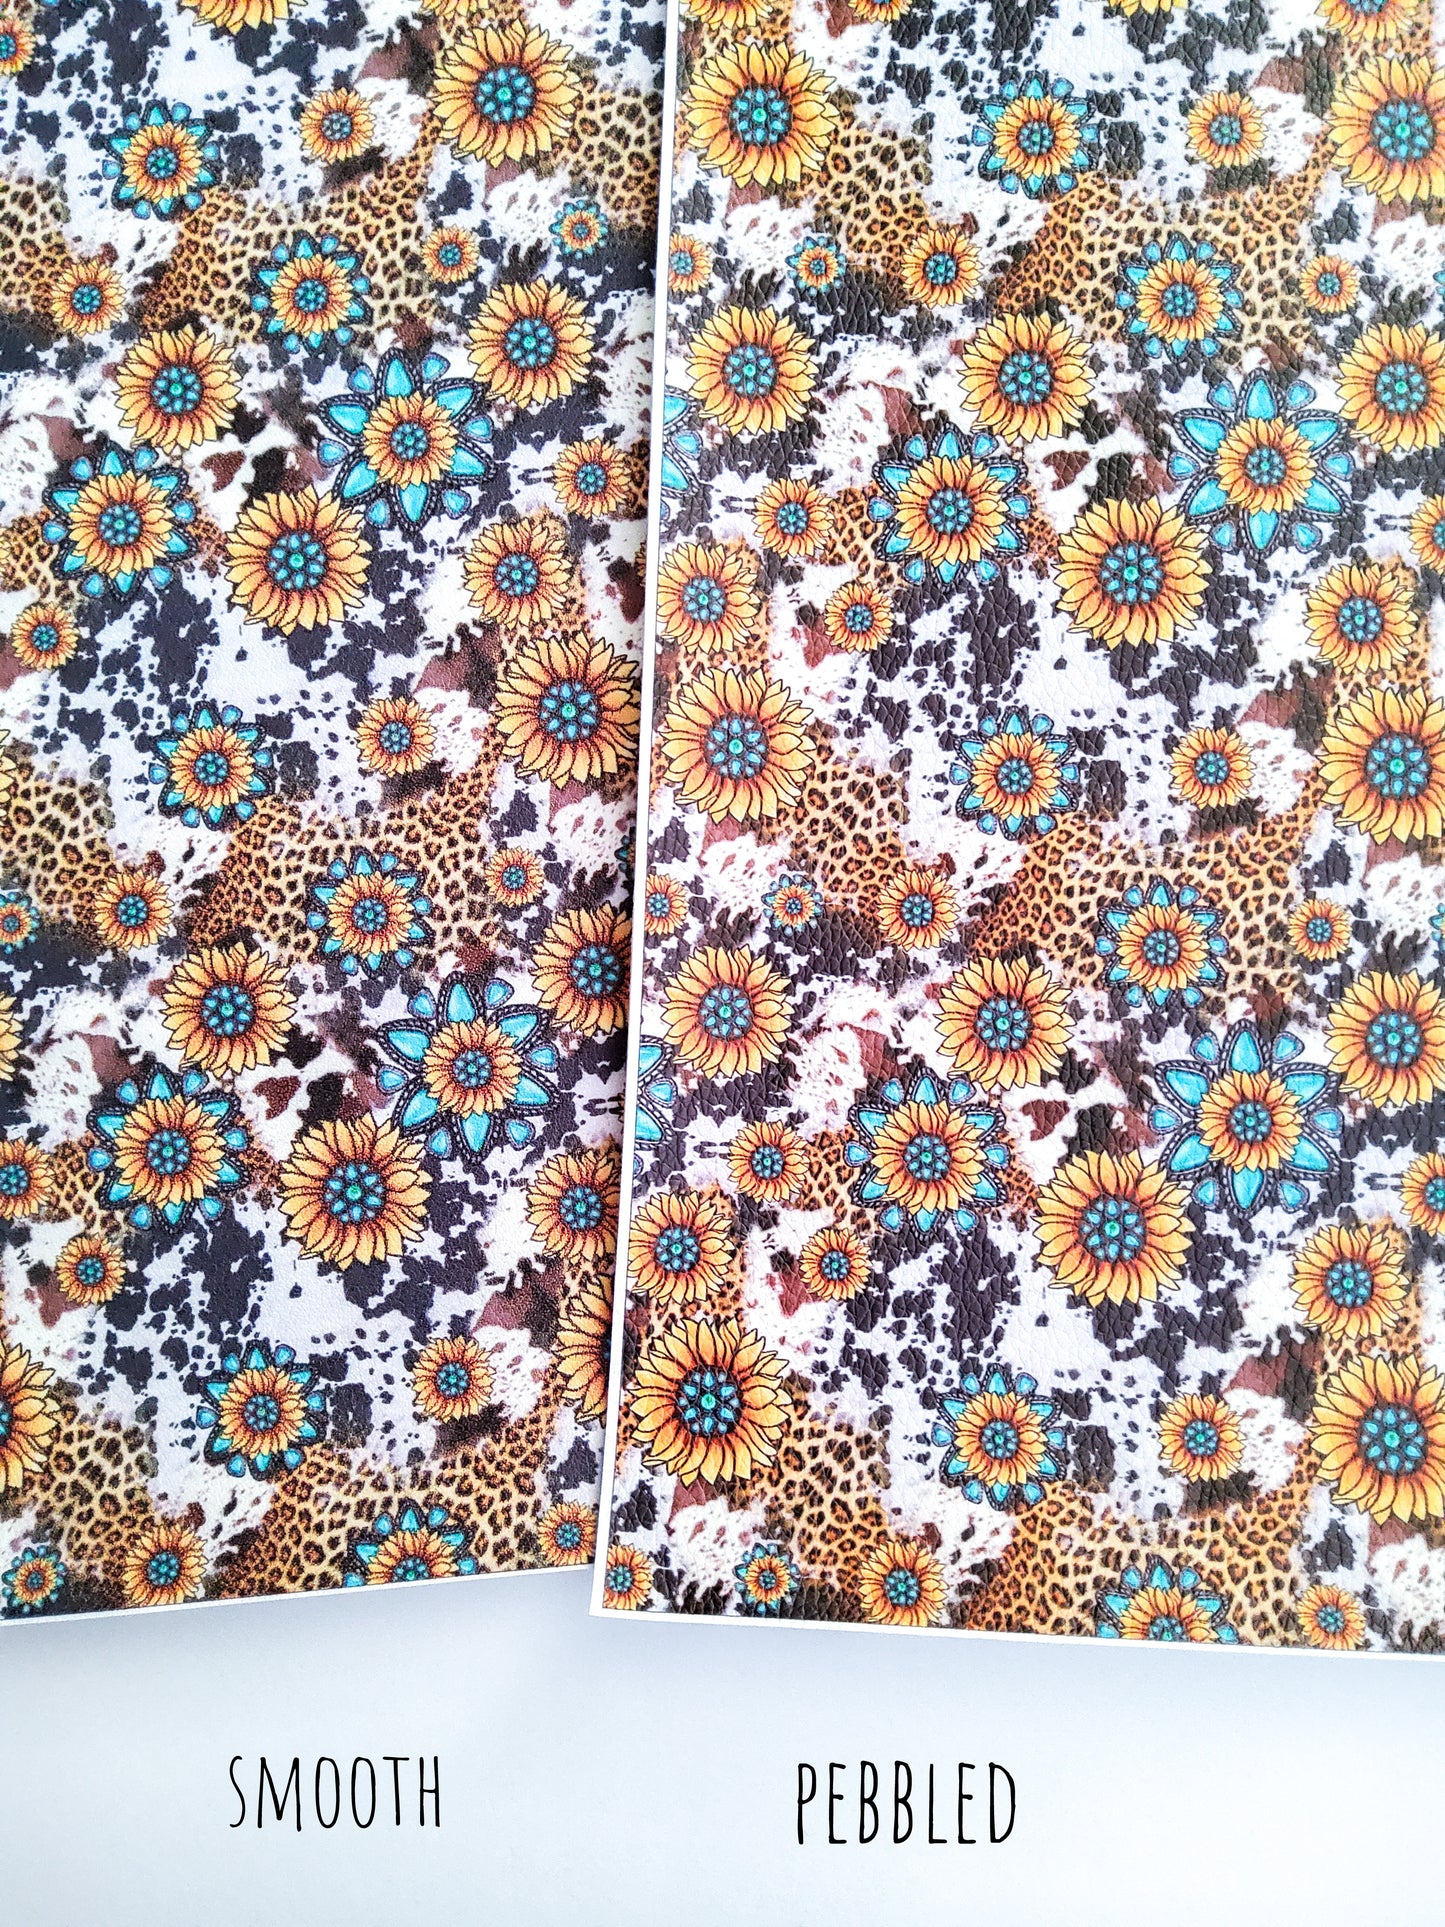 Cow Print Sunflowers 9x12 faux leather sheet